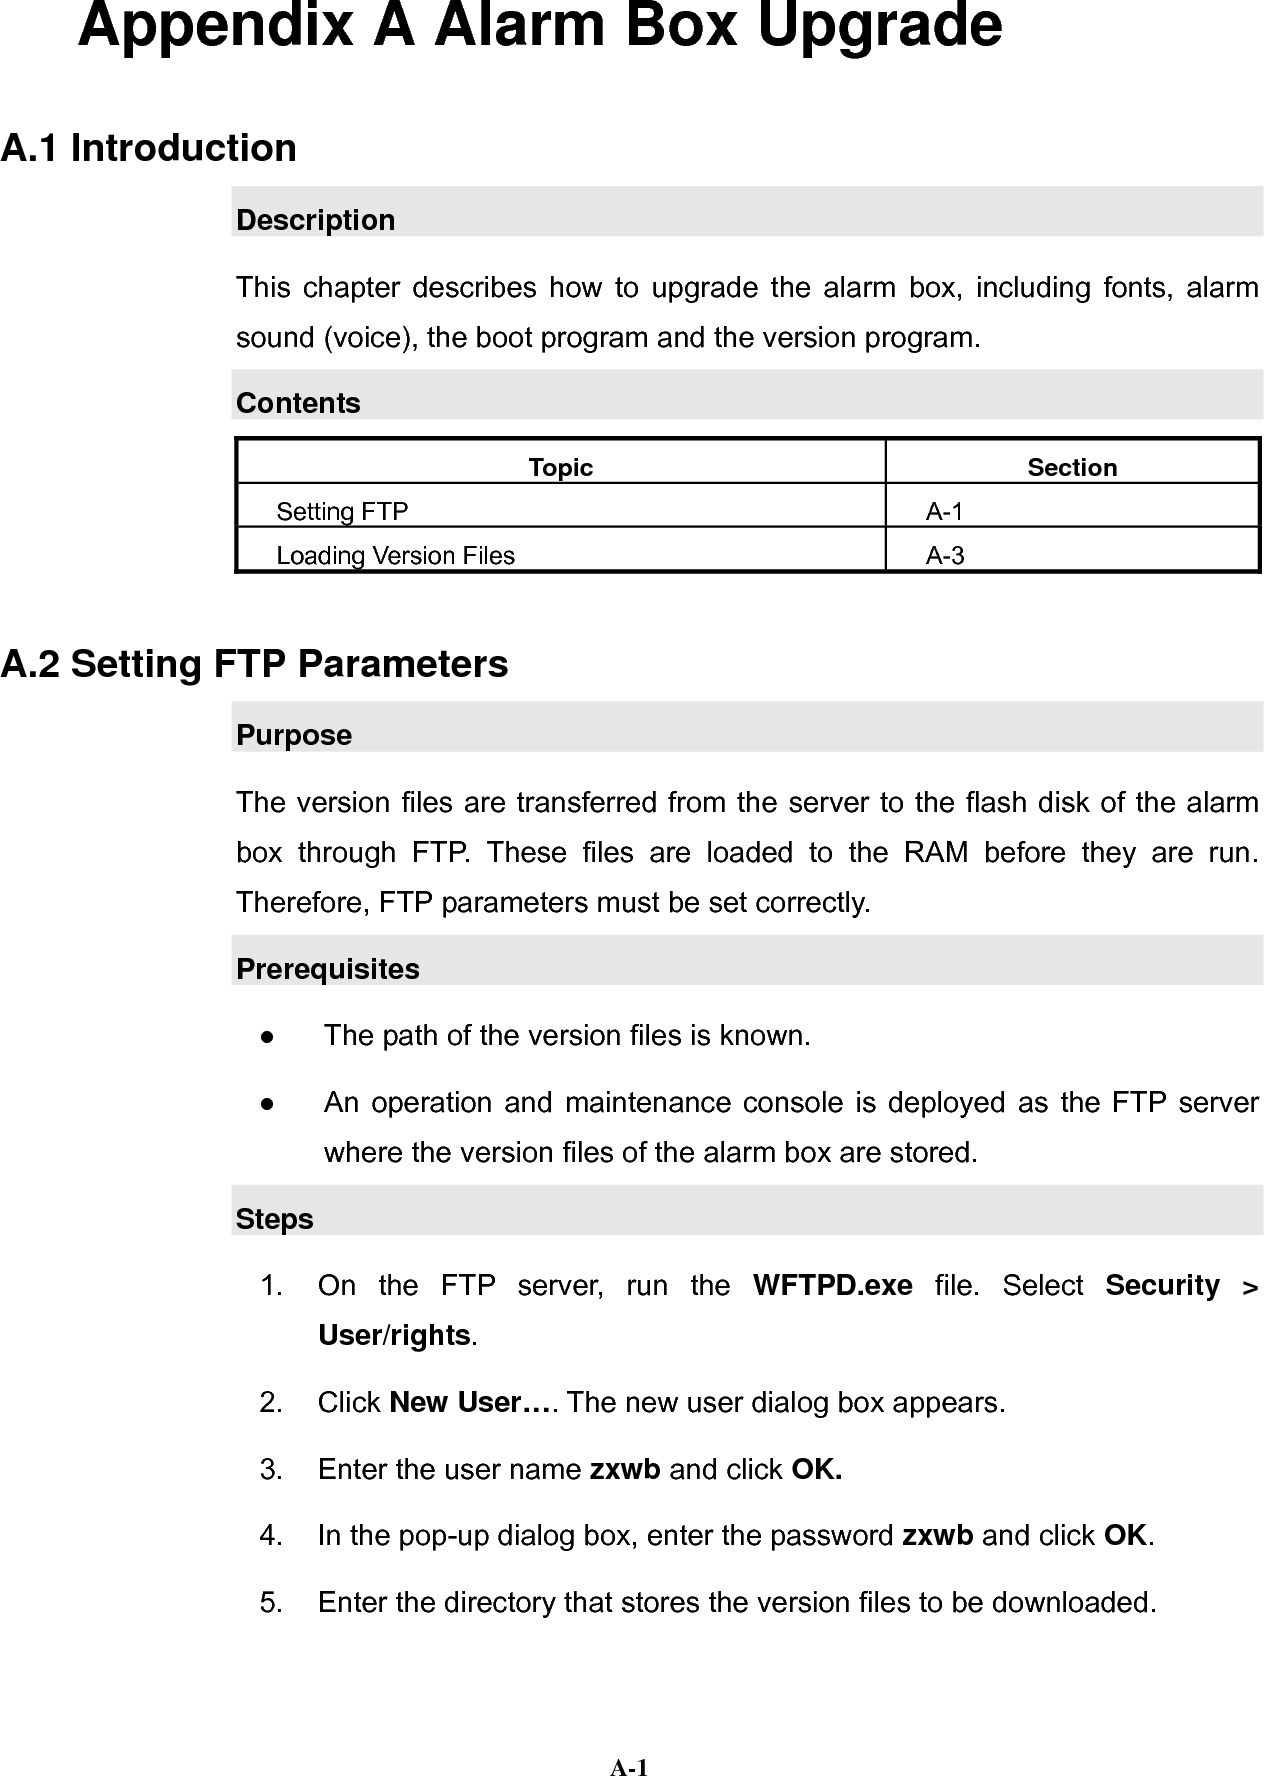   A-1Appendix A Alarm Box Upgrade A.1 Introduction Description This chapter describes how to upgrade the alarm box, including fonts, alarm sound (voice), the boot program and the version program. Contents Topic Section Setting FTP    A-1 Loading Version Files  A-3 A.2 Setting FTP Parameters Purpose The version files are transferred from the server to the flash disk of the alarm box through FTP. These files are loaded to the RAM before they are run. Therefore, FTP parameters must be set correctly. Prerequisites   The path of the version files is known.   An operation and maintenance console is deployed as the FTP server where the version files of the alarm box are stored. Steps 1.  On the FTP server, run the WFTPD.exe file. Select Security &gt; User/rights. 2. Click New User…. The new user dialog box appears. 3.  Enter the user name zxwb and click OK. 4.  In the pop-up dialog box, enter the password zxwb and click OK. 5.  Enter the directory that stores the version files to be downloaded. 